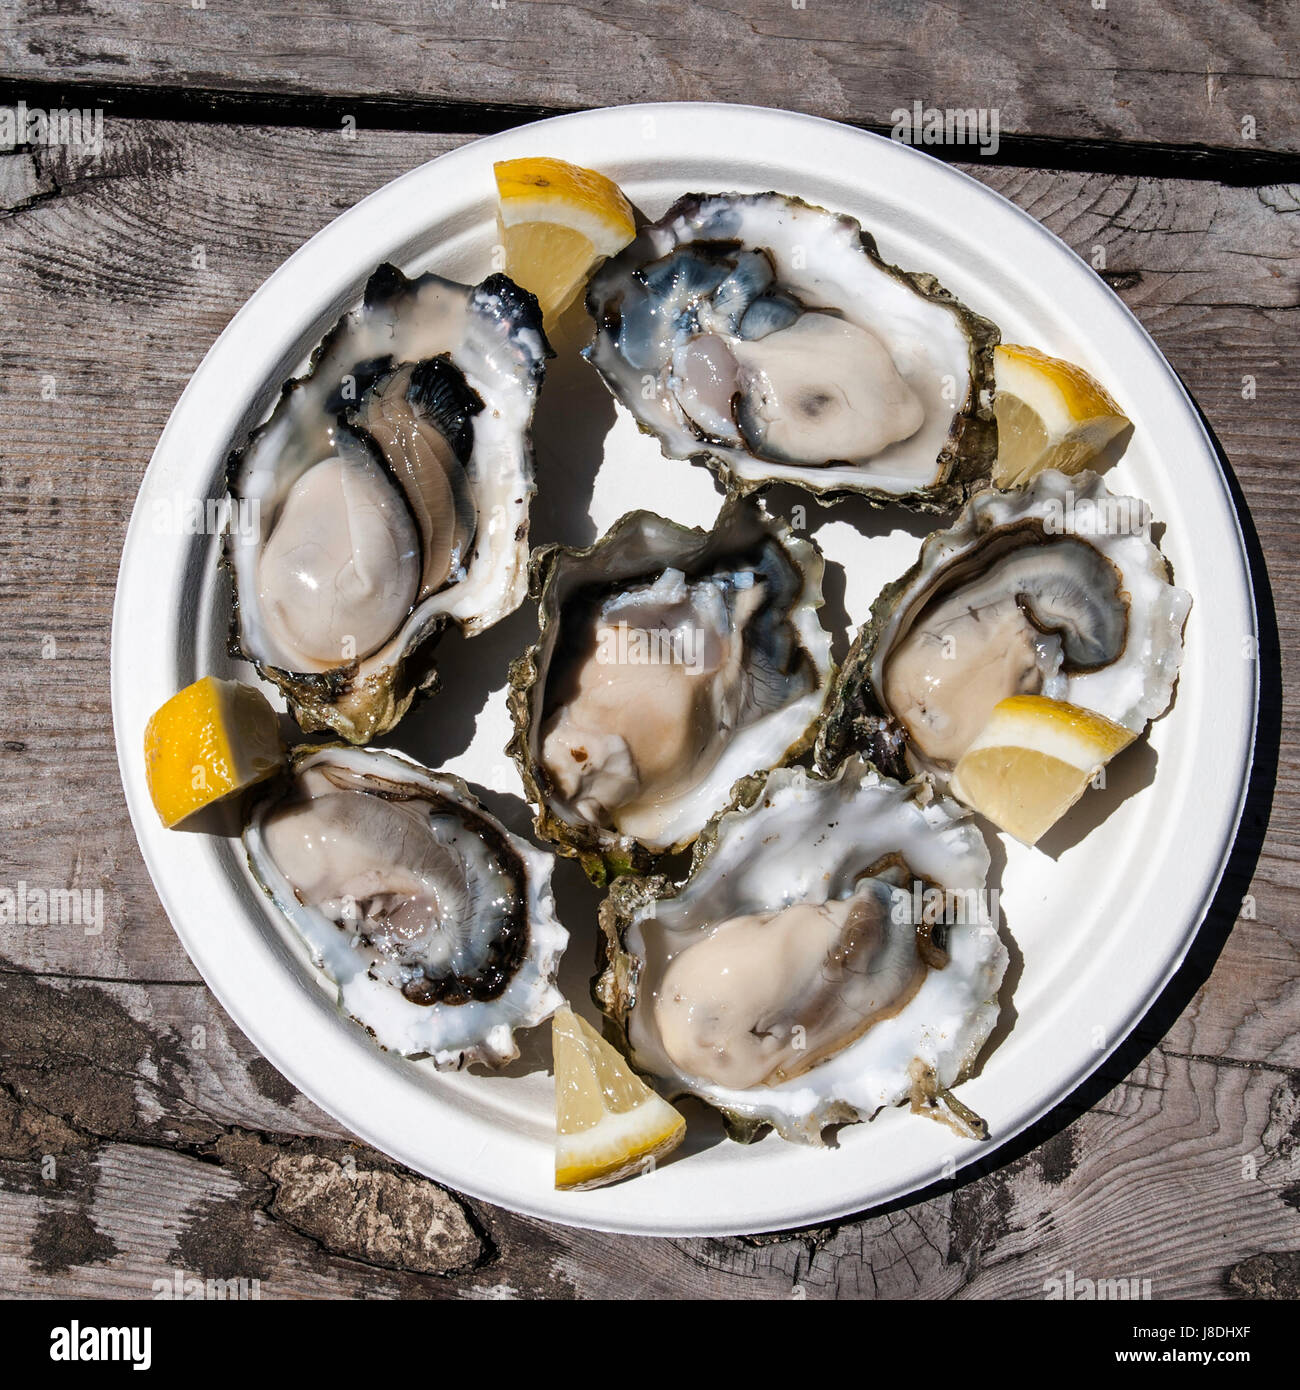 Plate of oysters Stock Photo